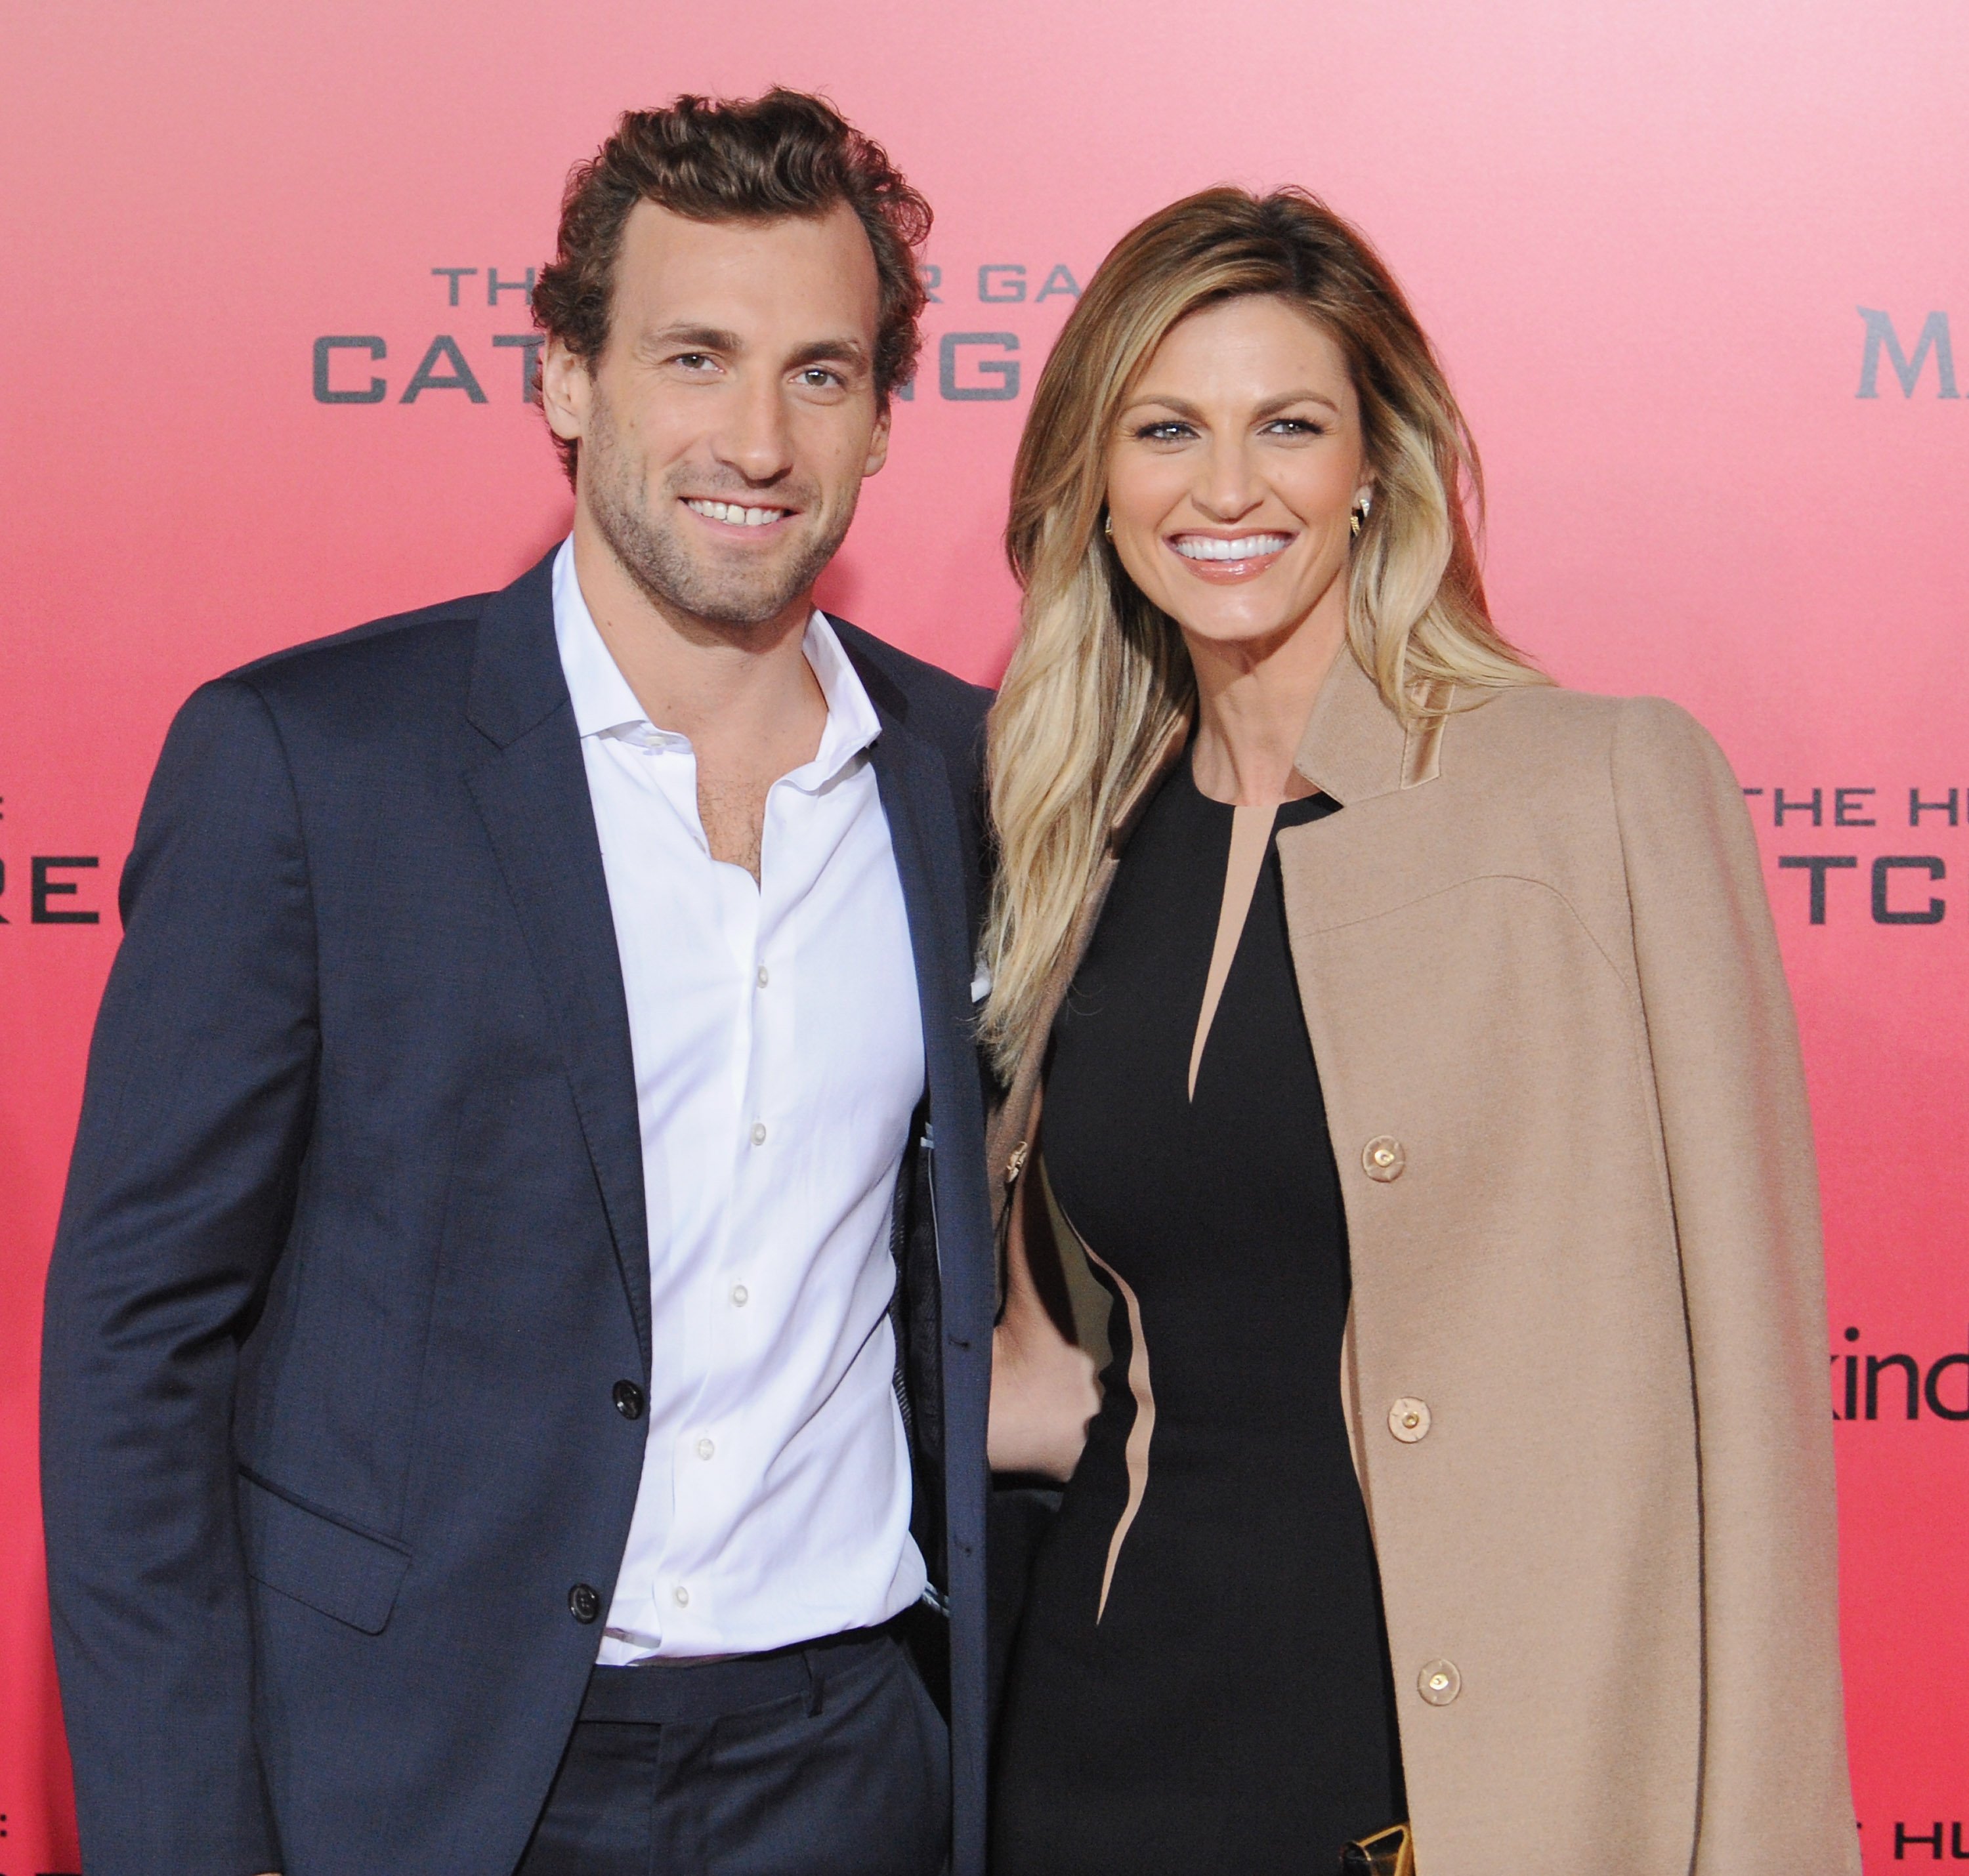 Erin Andrews’ Husband Jarret Stoll Is a Former NHL Player: Facts about ...